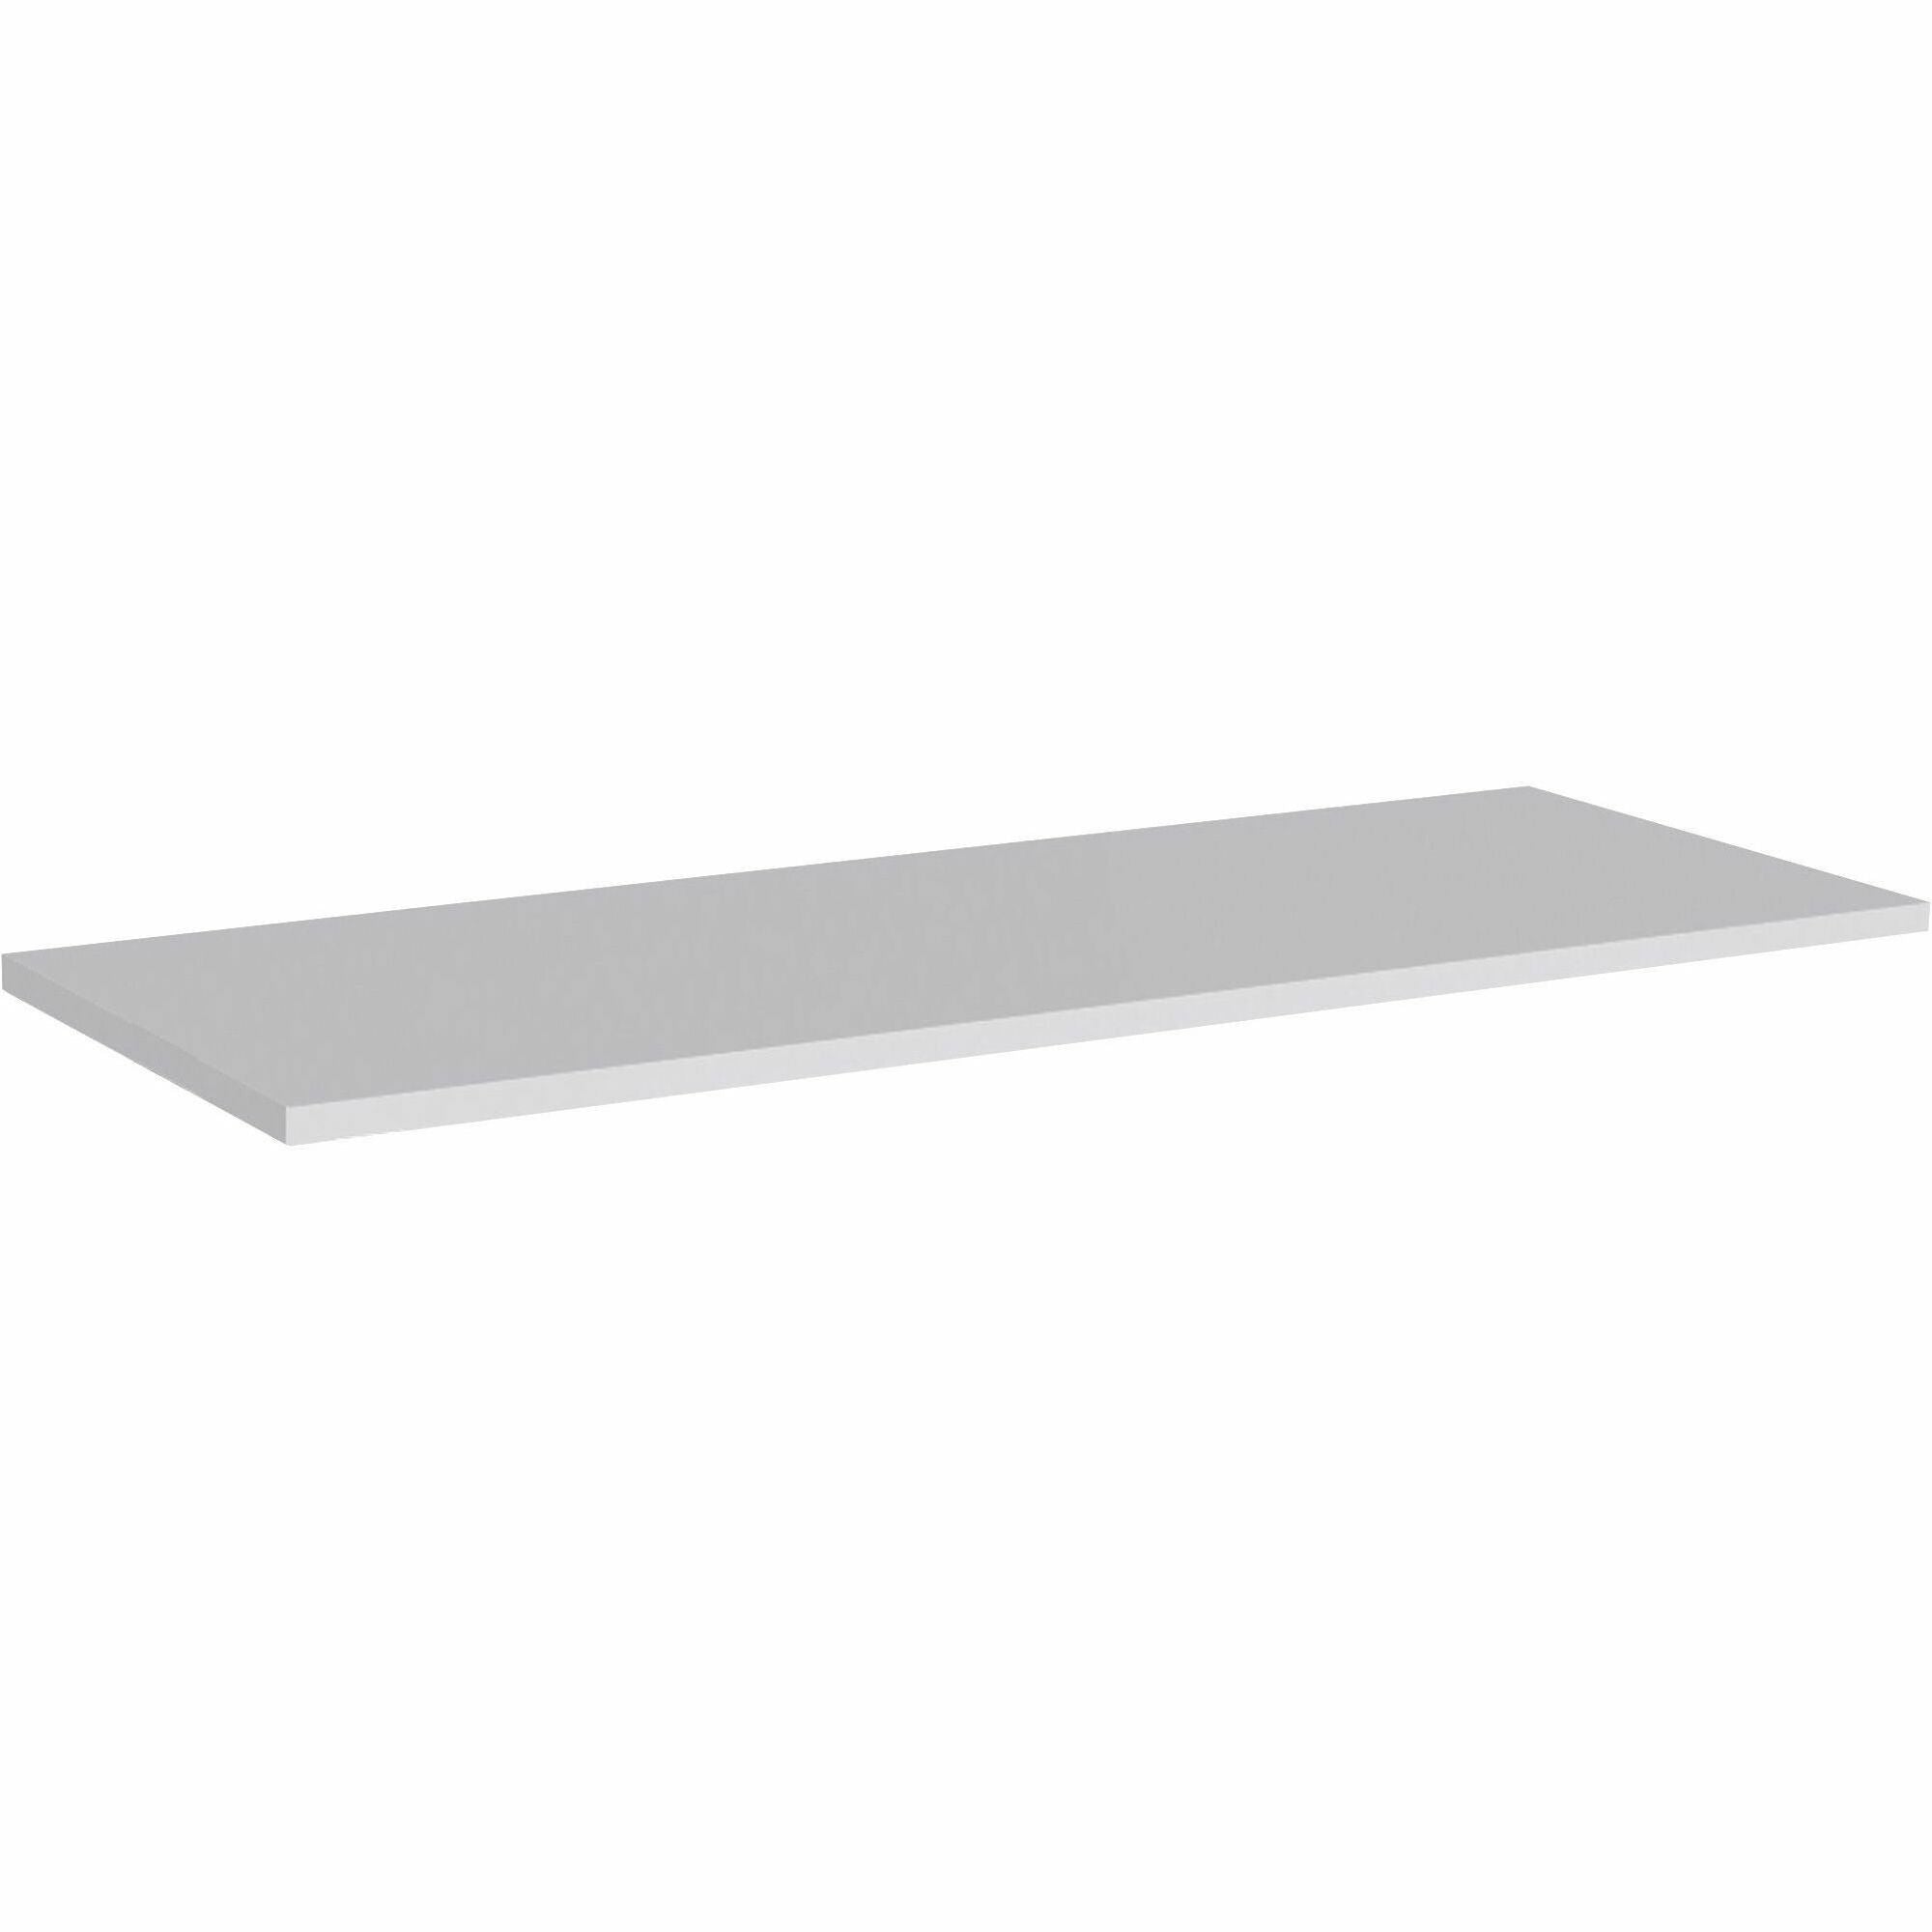 special-t-kingston-60w-table-laminate-tabletop-for-table-topgray-rectangle-low-pressure-laminate-lpl-top-60-table-top-length-x-24-table-top-width-x-1-table-top-thickness-1-each_sctsp2460gr - 1